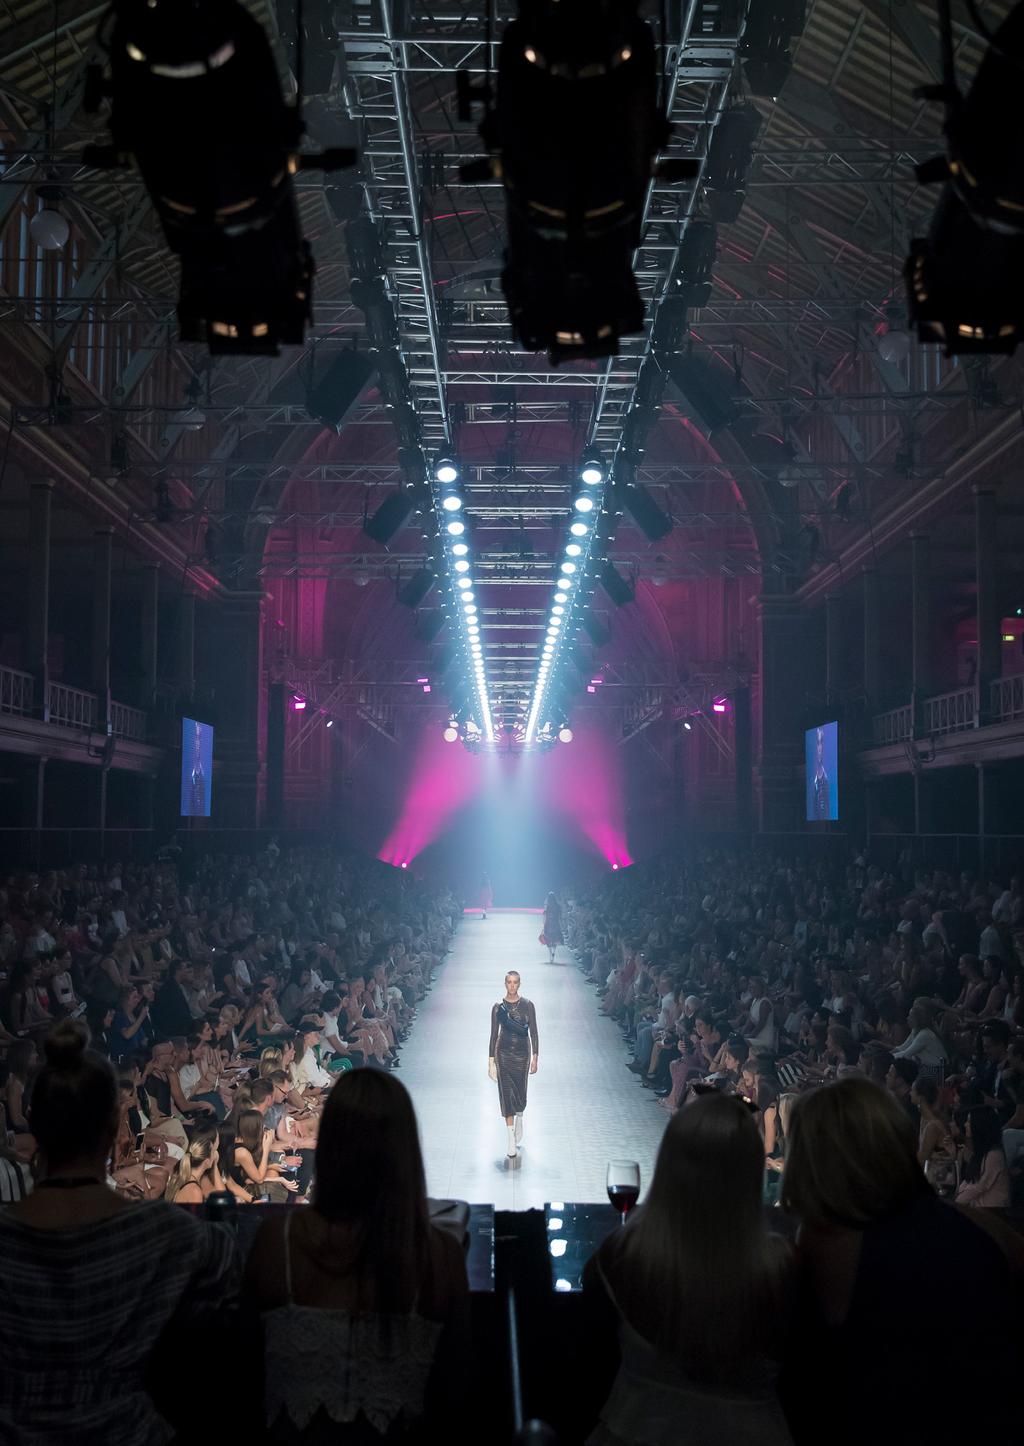 RUNWAY BOXES AND SUITES ROYAL EXHIBITION BUILDING MONDAY 4 MARCH SATURDAY 9 MARCH 2019 Be part of Australia s largest fashion event and see the nations top designers up close with the best seats in